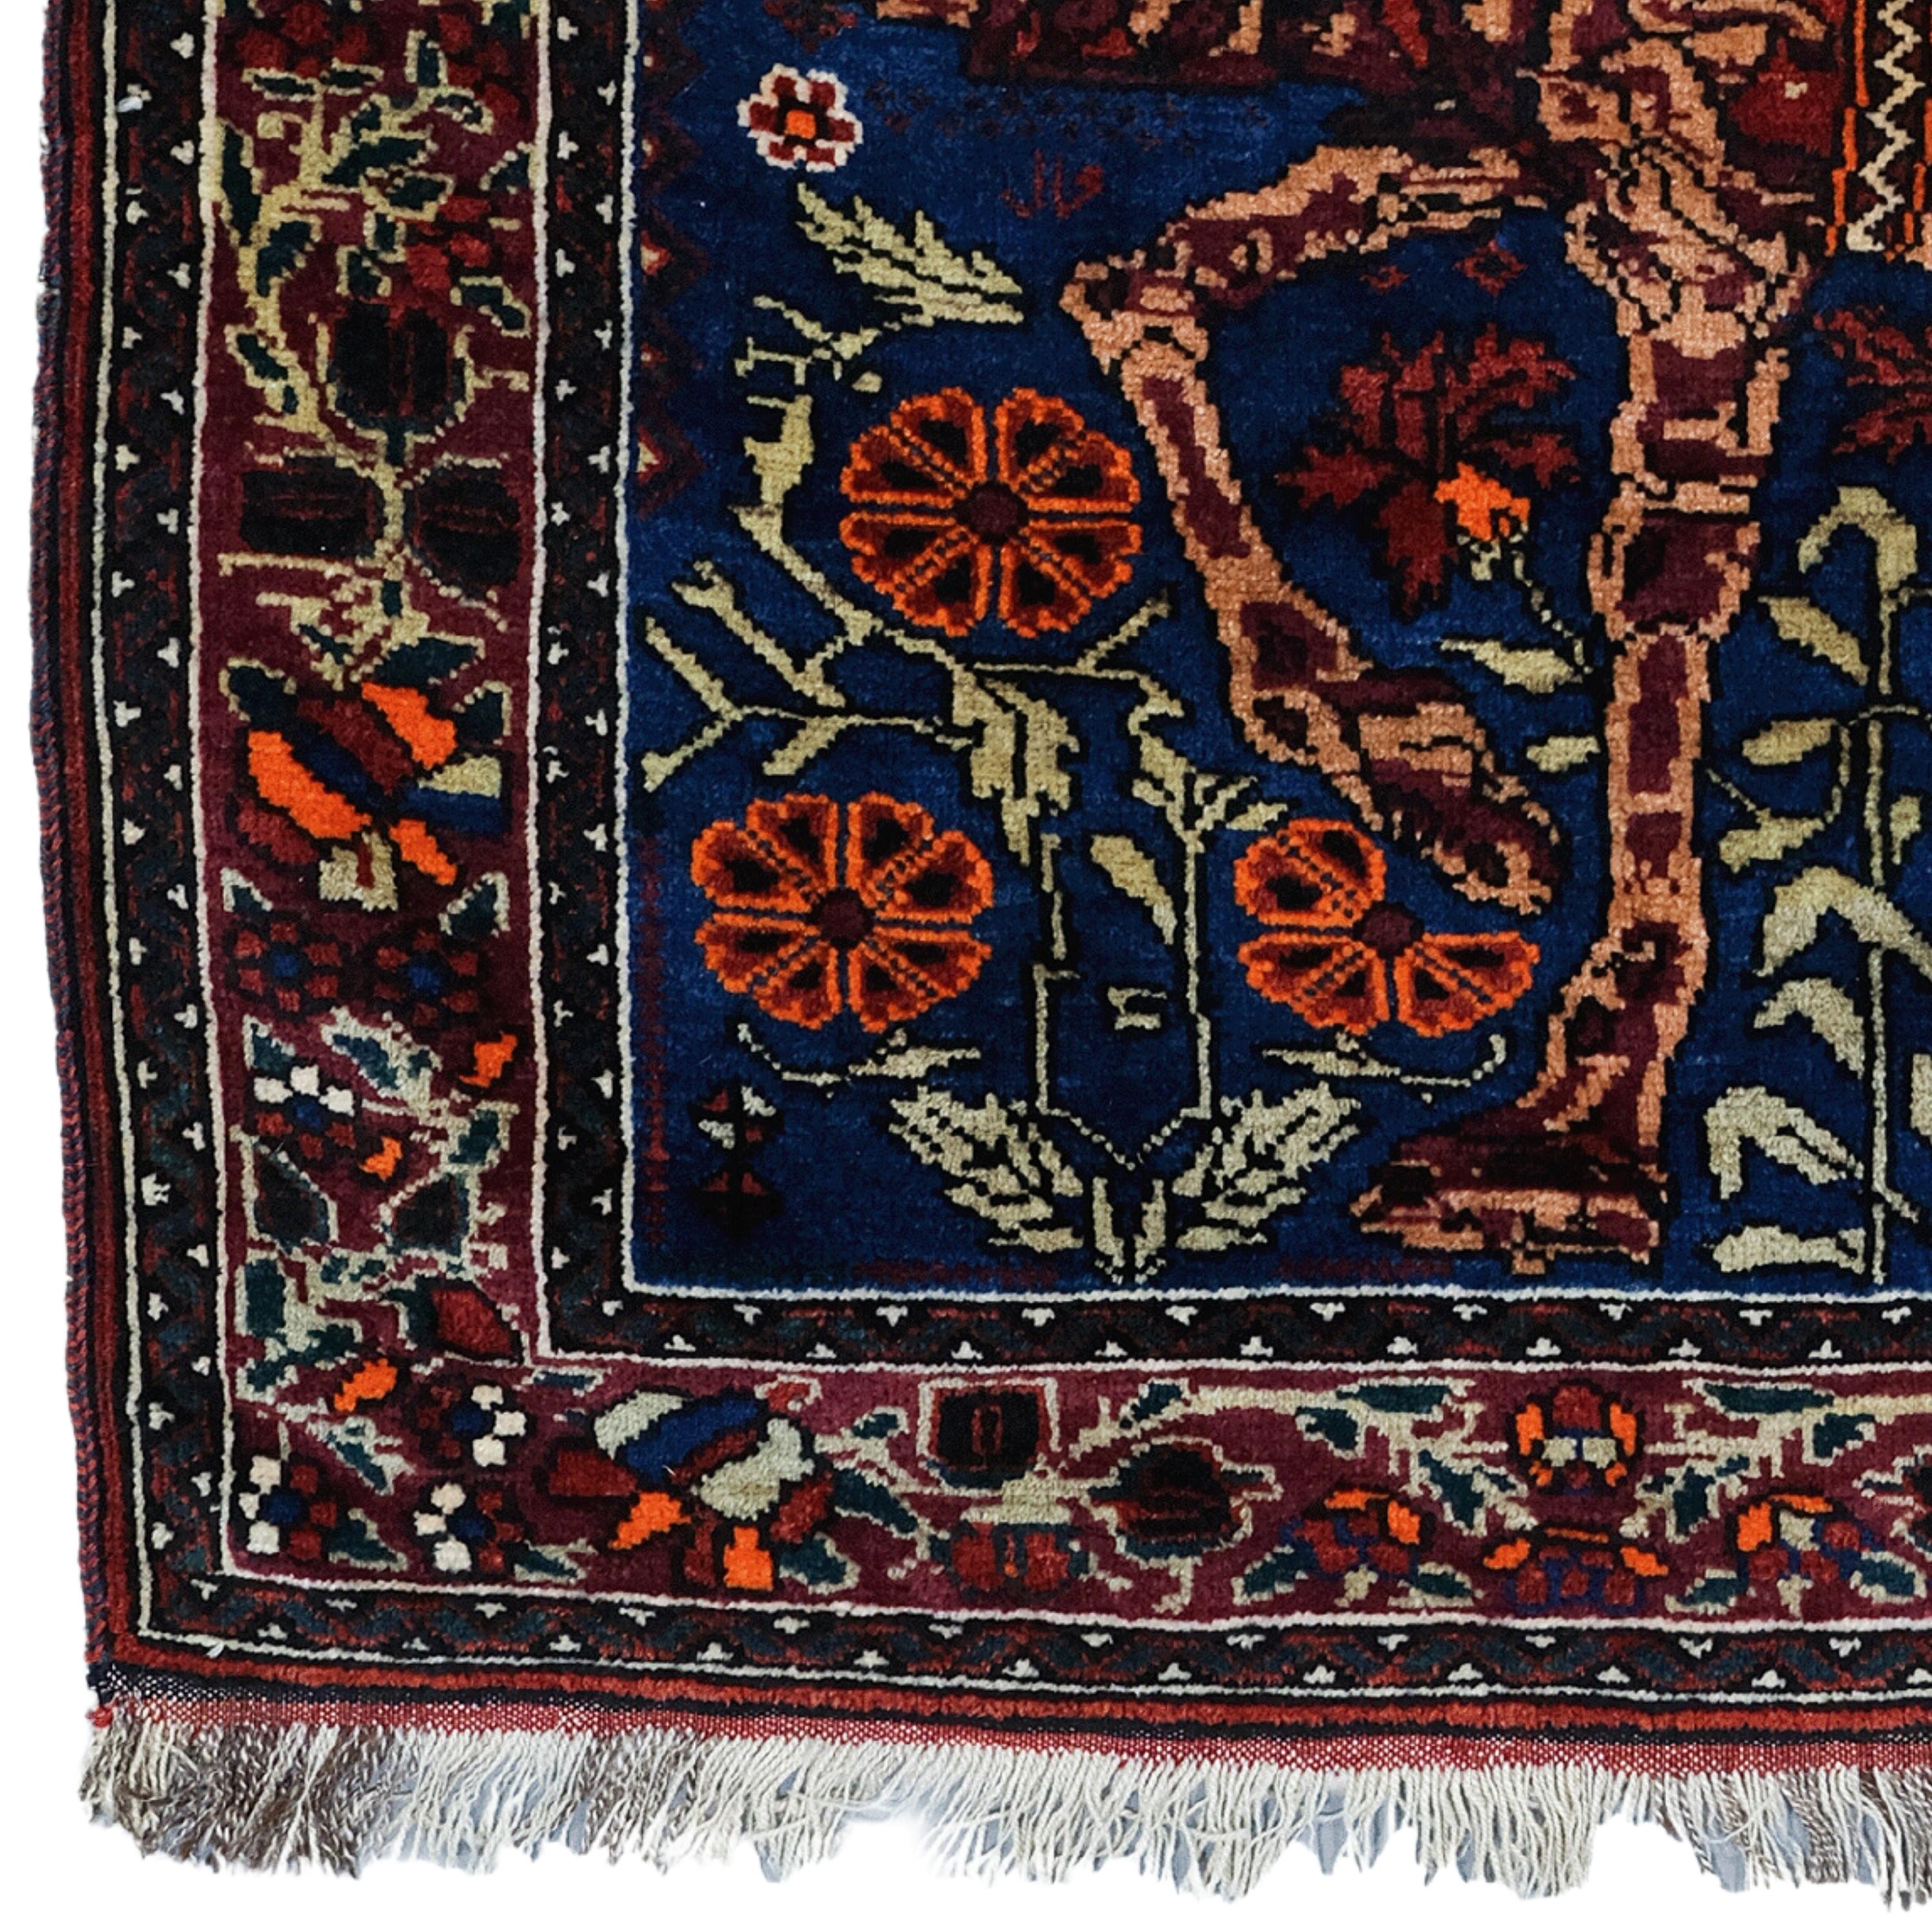 19th Century Khamseh Rug - Antique Hanwoven Rug

This elegant 19th-century Khamseh rug adds nobility to any space with its historical richness and sophisticated design. This handmade work, measuring 88x110 cm, dazzles with its carefully woven